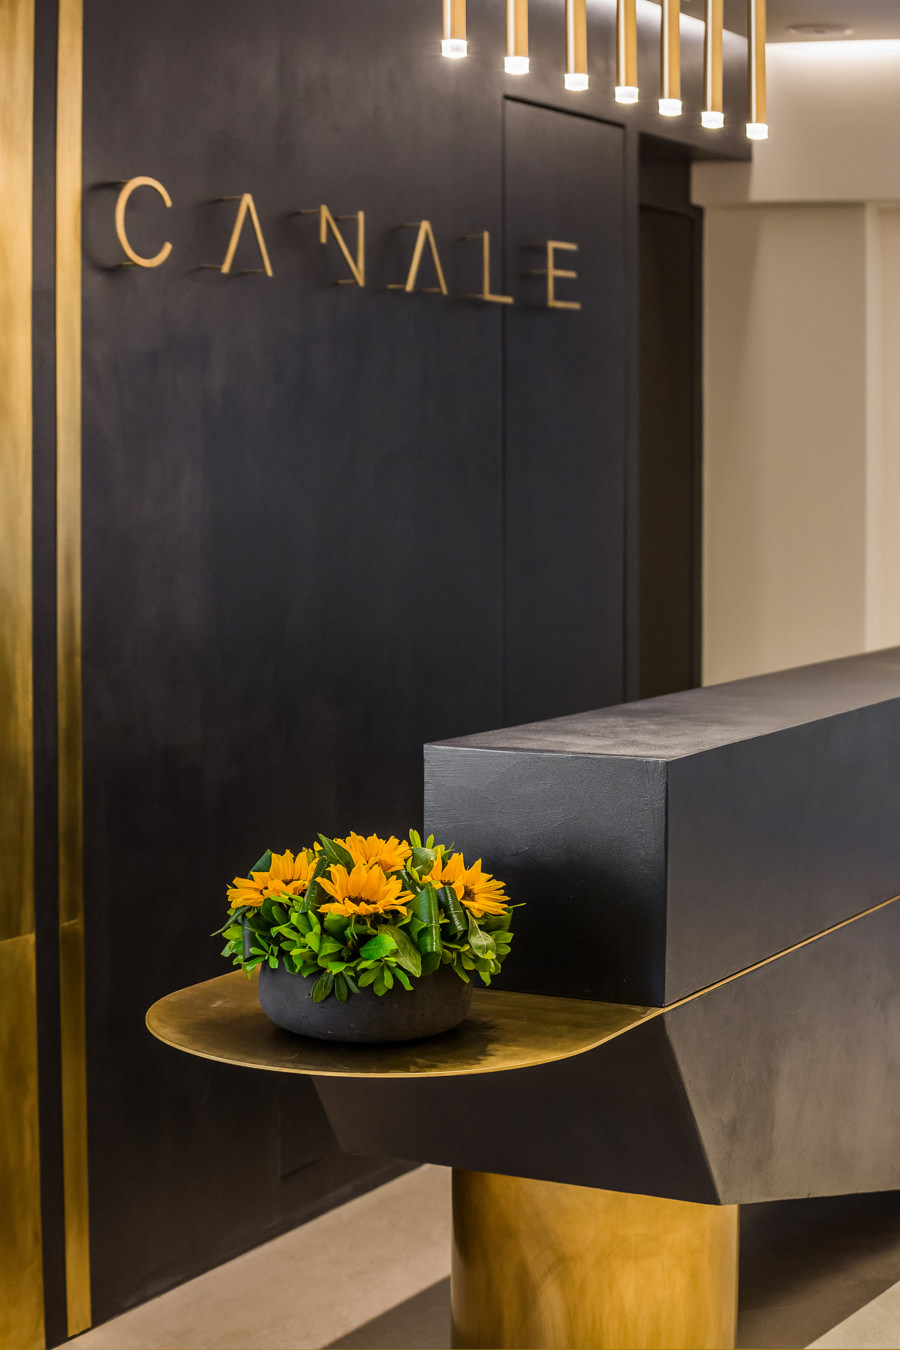 Canale Hotel & Suites by Stamenis Nikiforos Photography